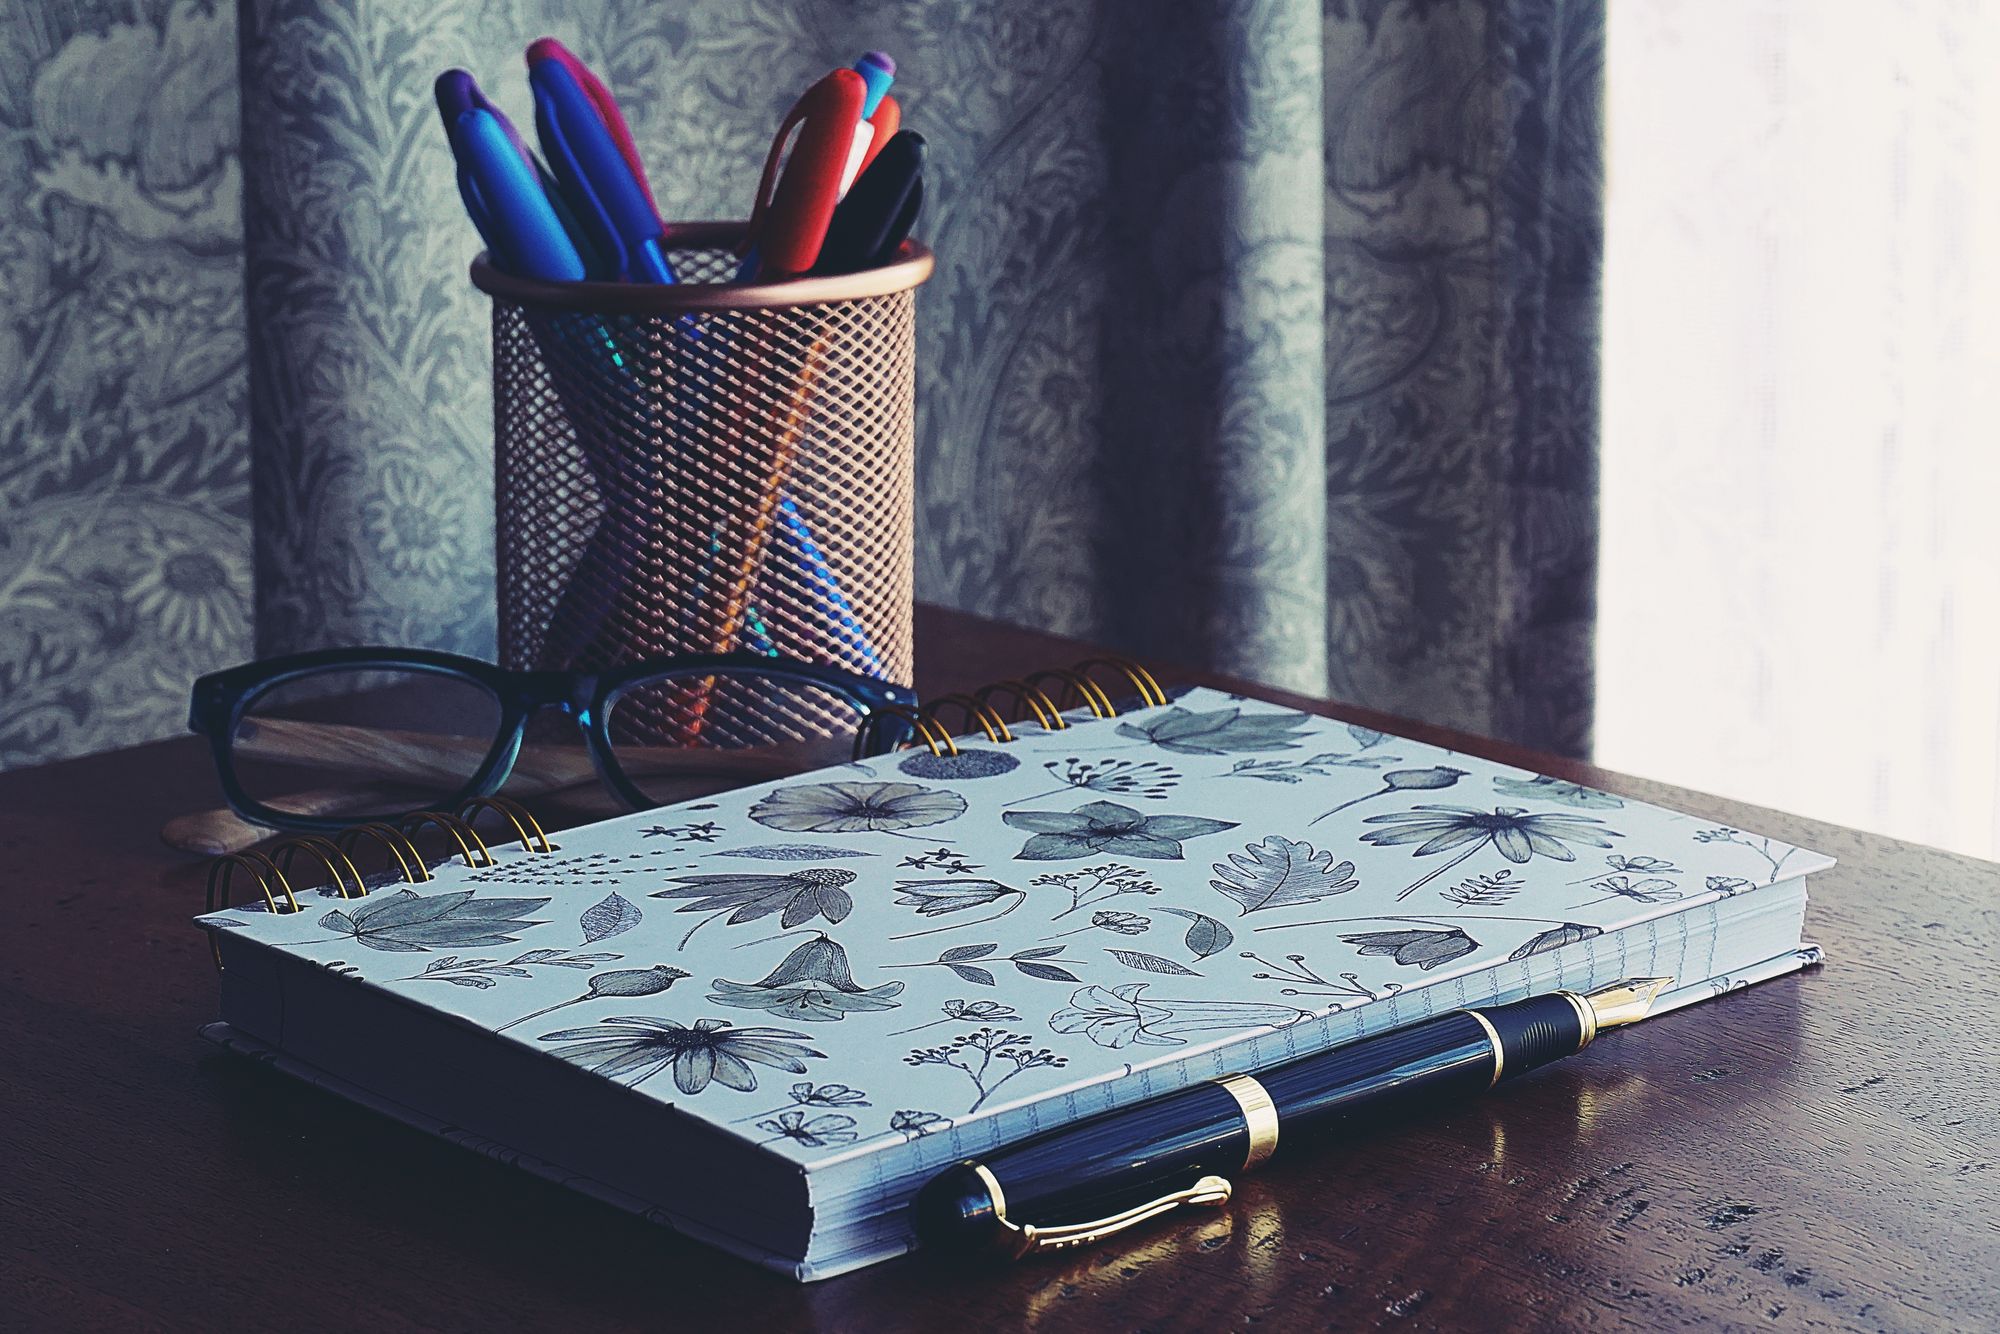 Notebook Books Free Stock Image